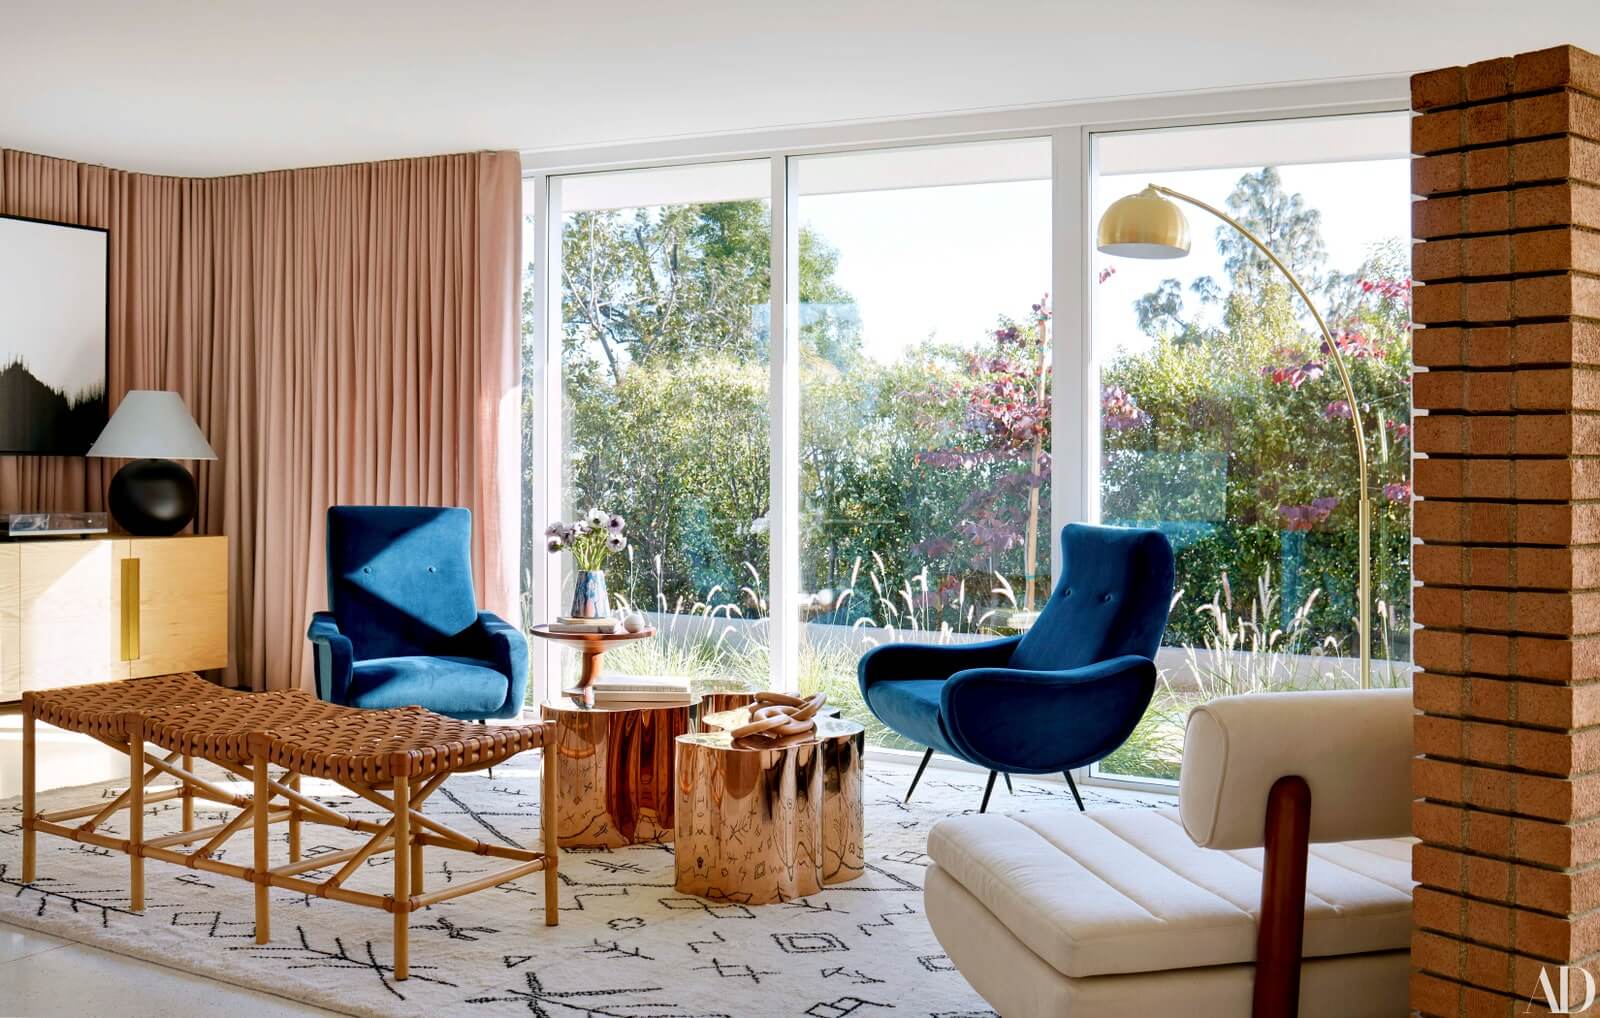 This Is Us star's Mid-Century House in Pasadena